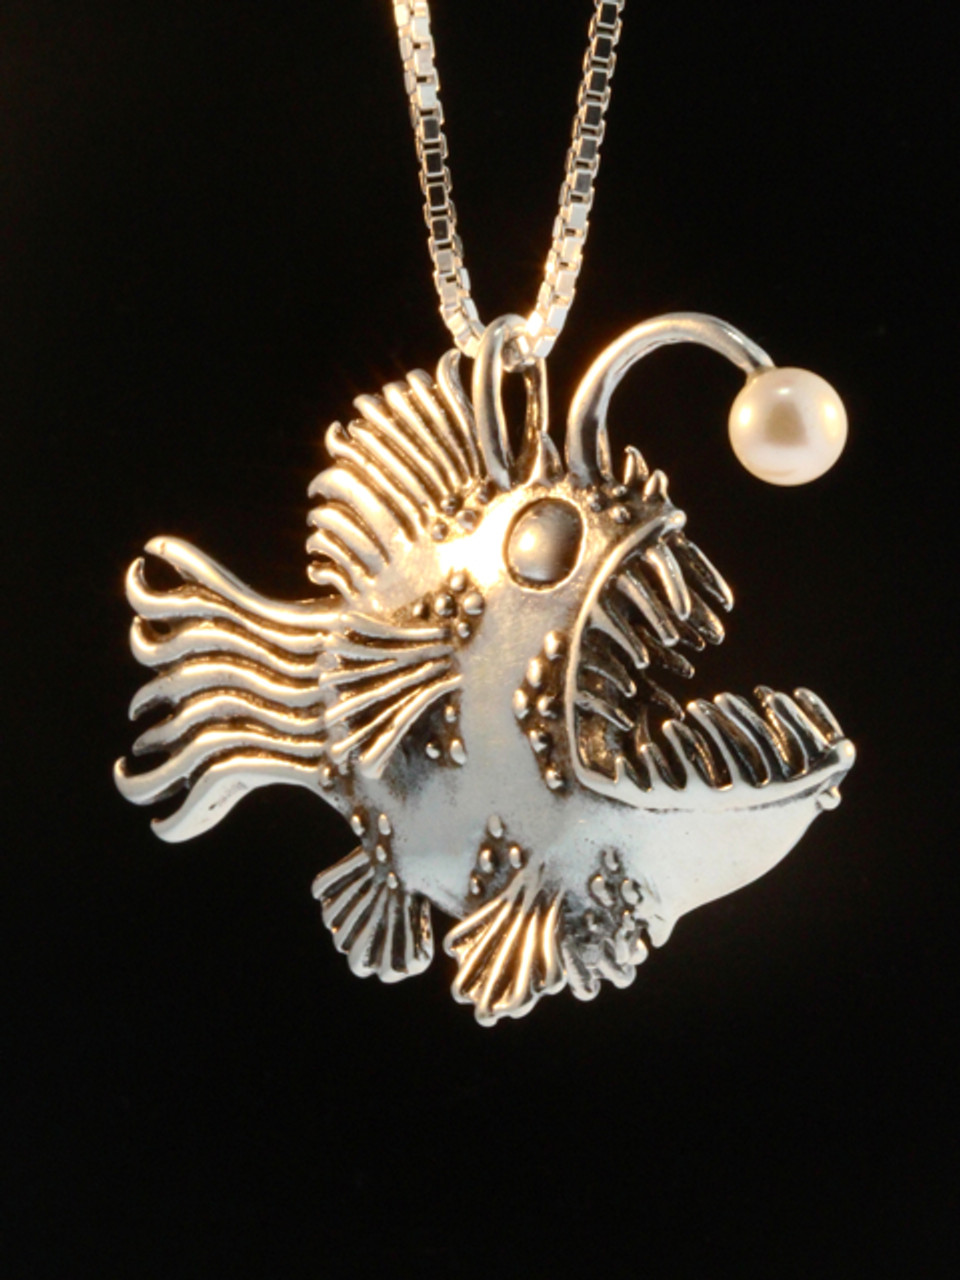 Large Angler Fish Pendant with White Pearl Lure - Silver